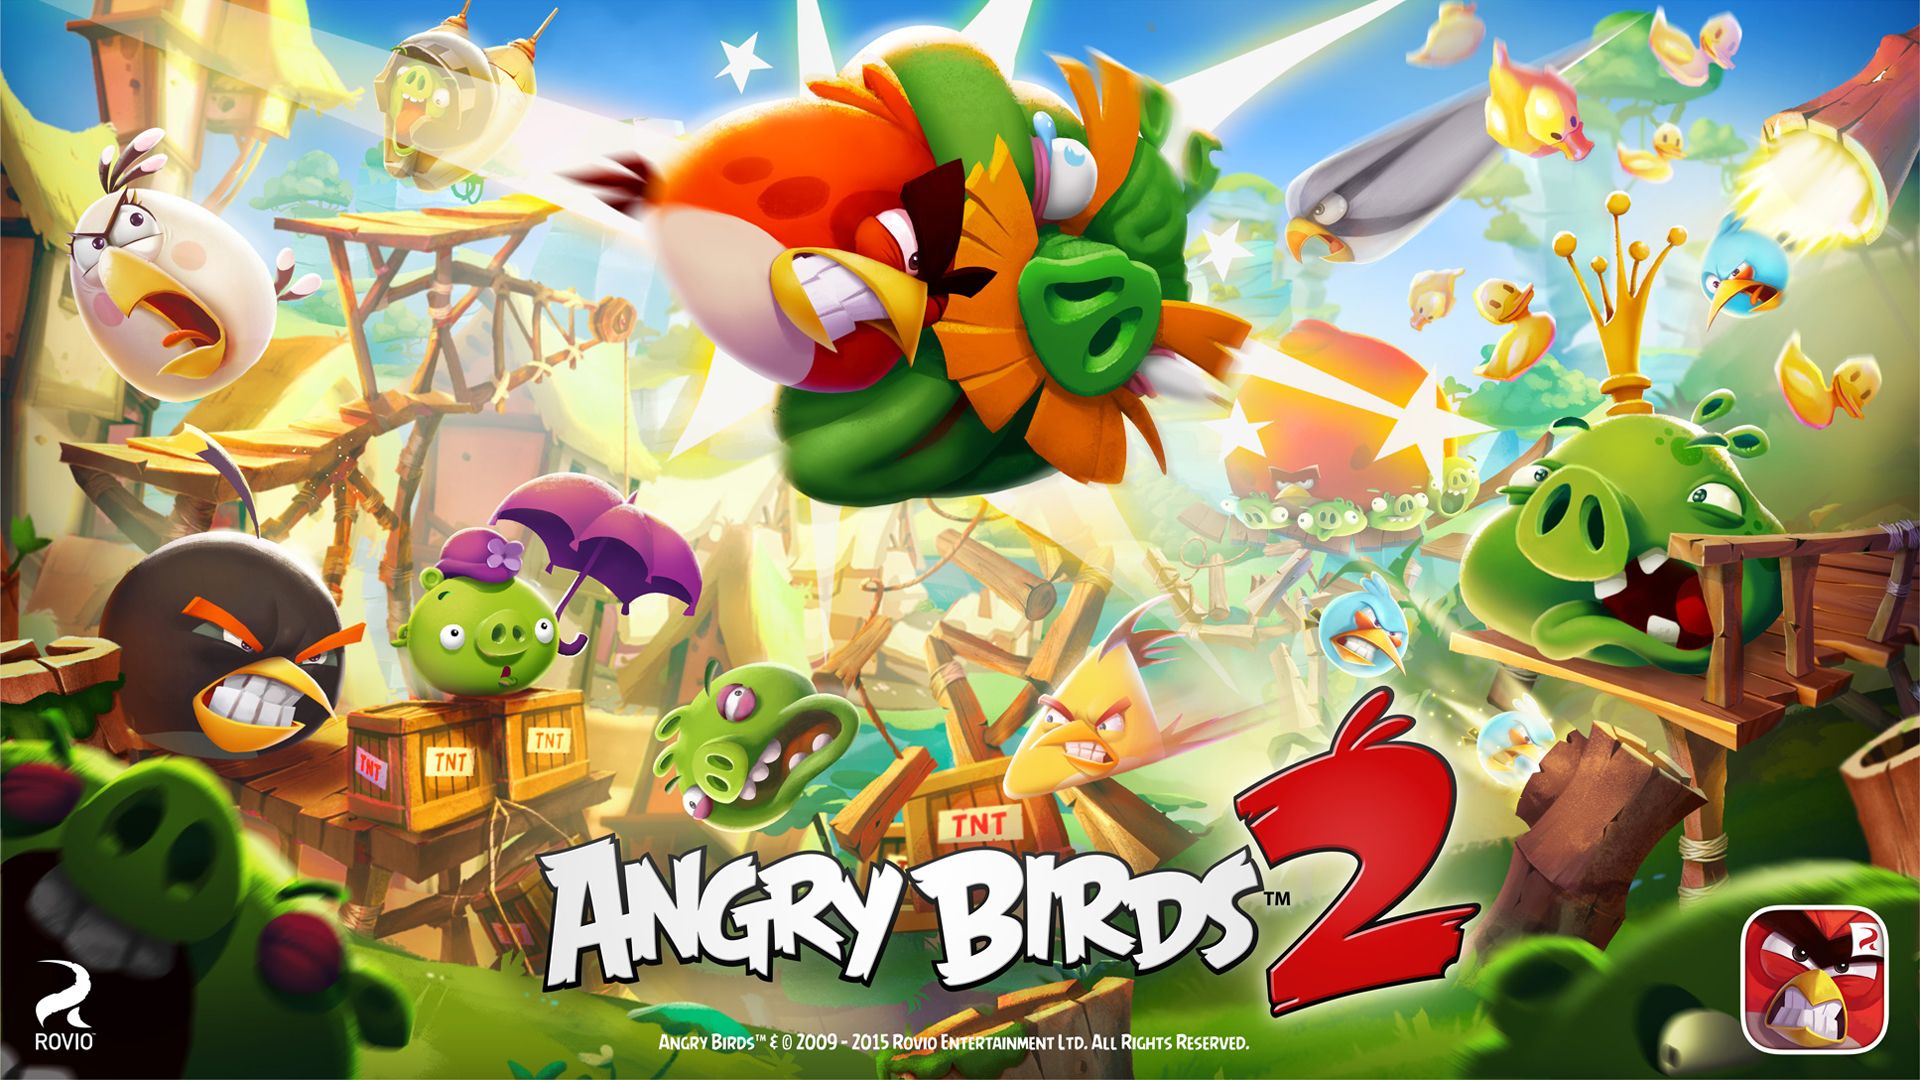 2 Angry Birds 2 HD Wallpapers | Backgrounds - Wallpaper Abyss